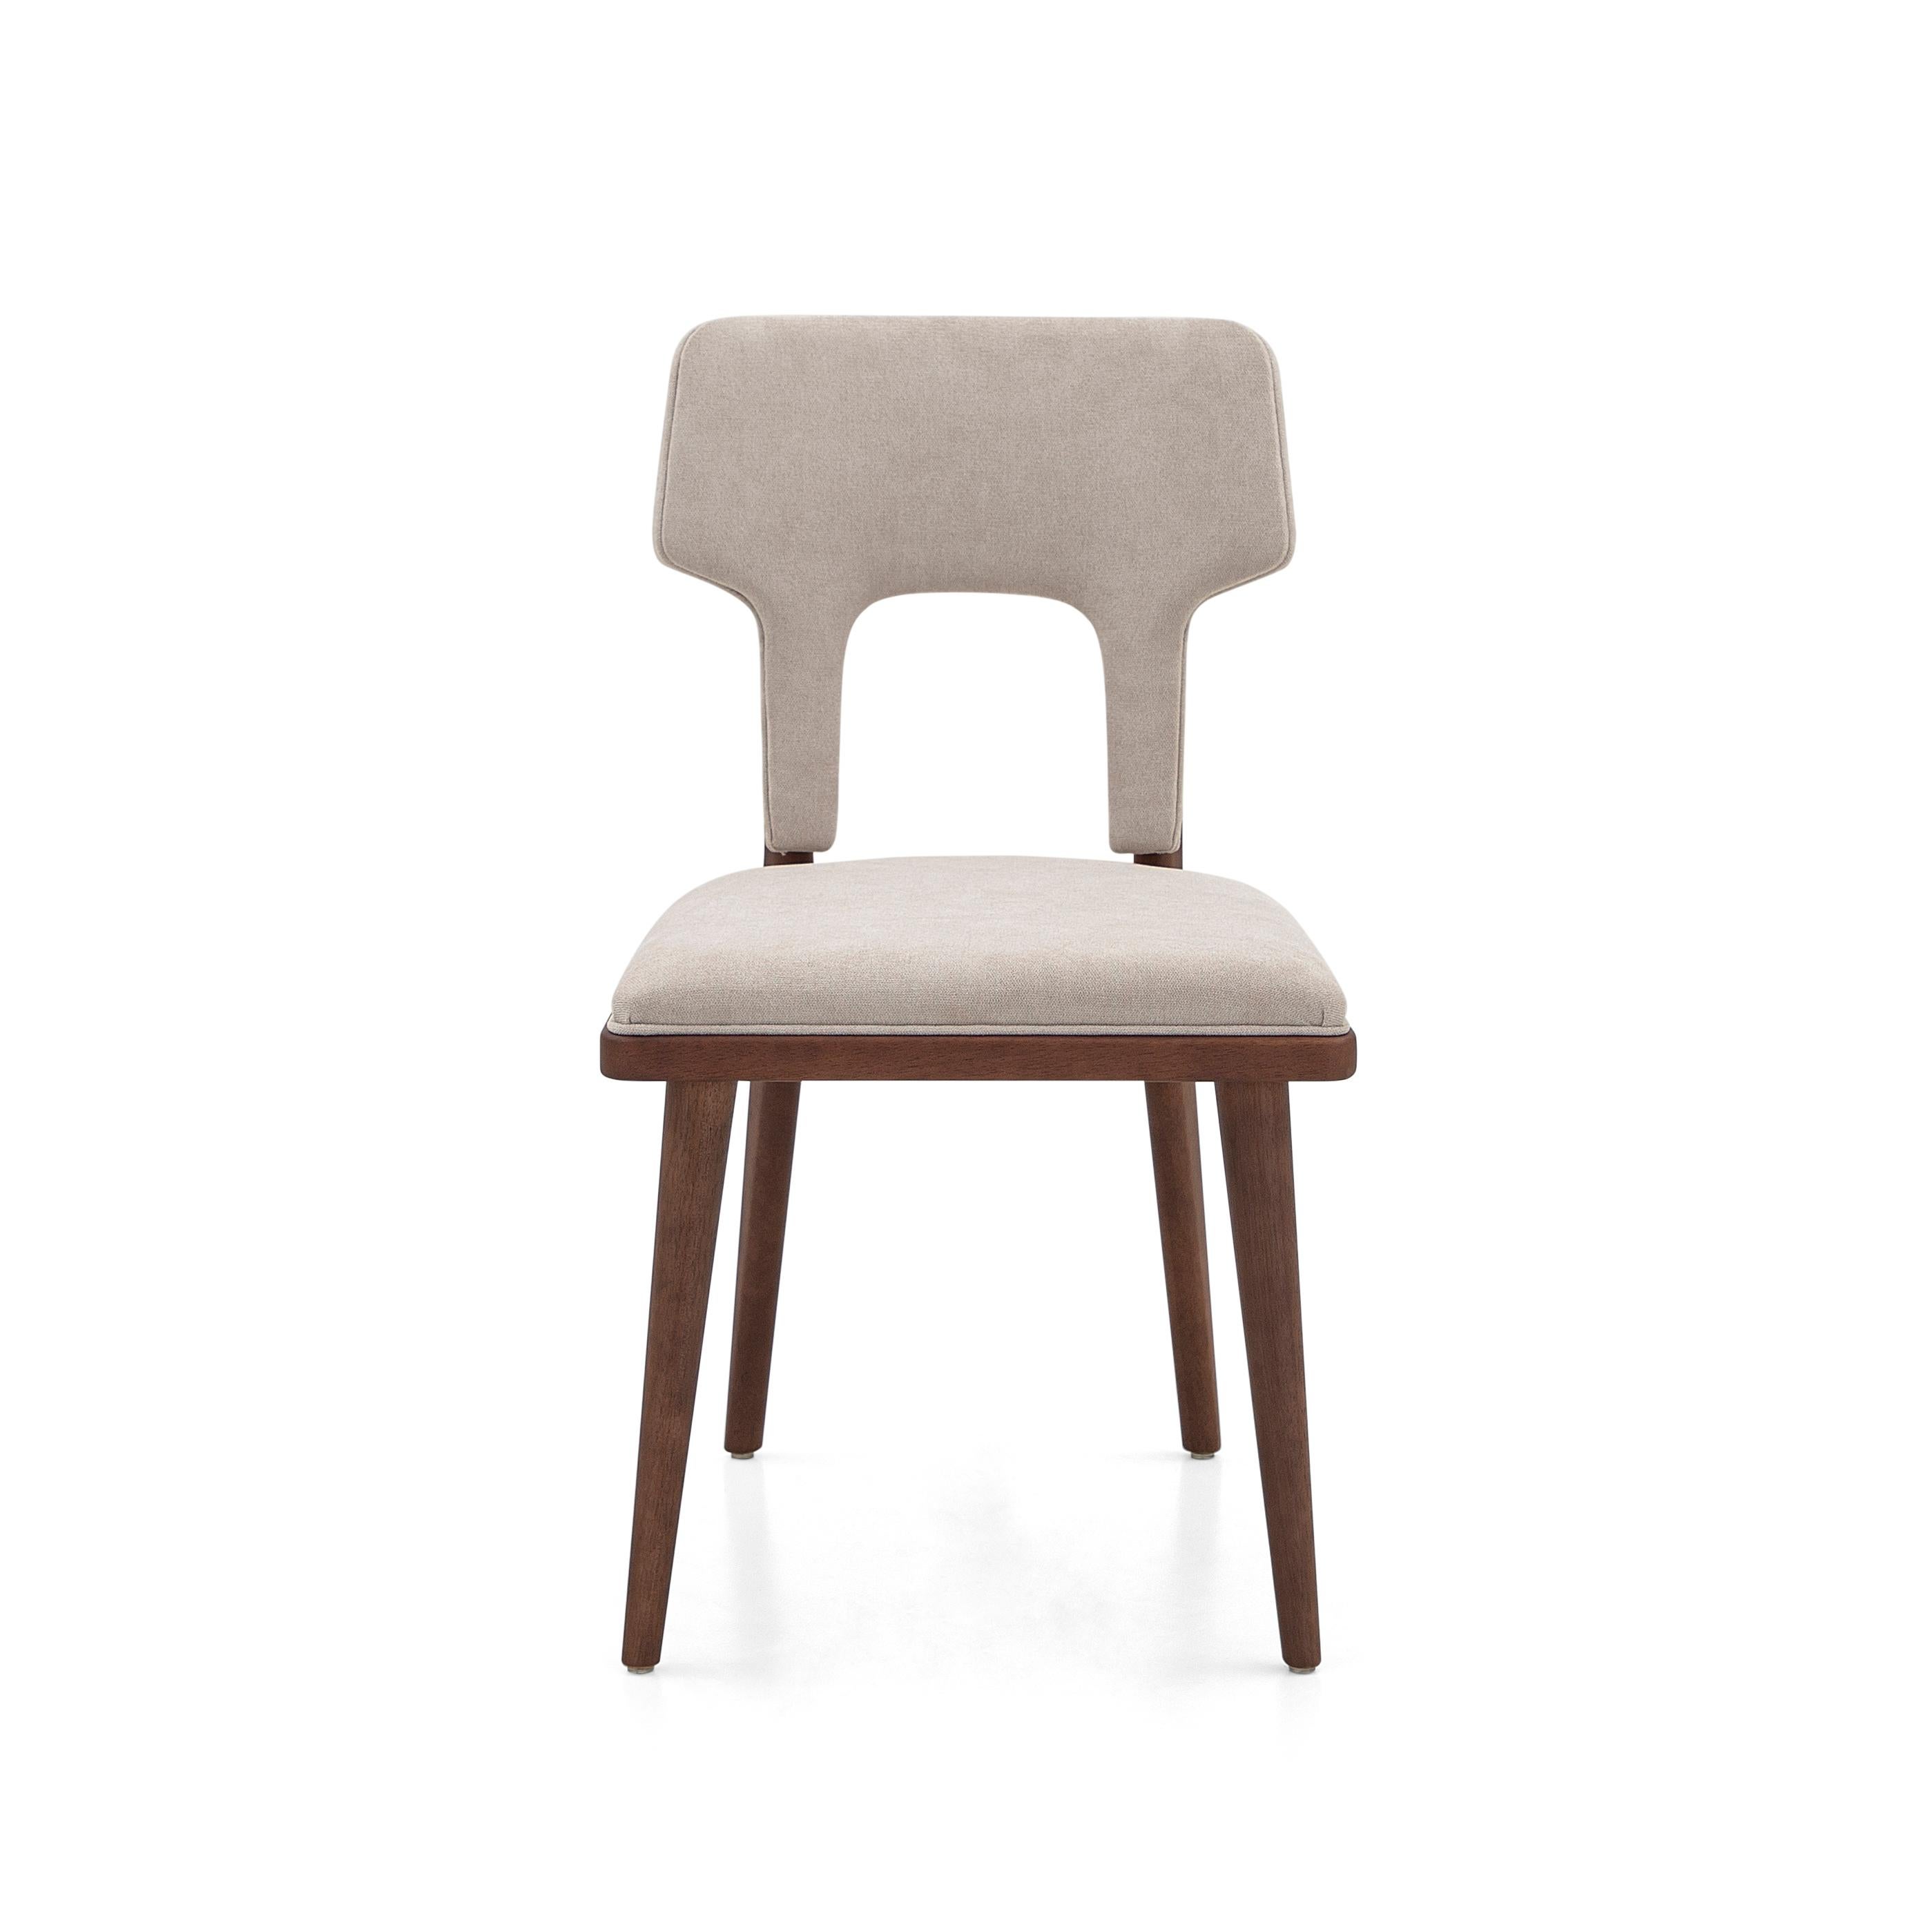 The Fork dining chair has been made by our Uultis team with a light beige fabric and a walnut wood Uultis finish for the legs. Our amazing team at Uultis has thought of every little detail so this dining chair is perfect and comfortable as well as